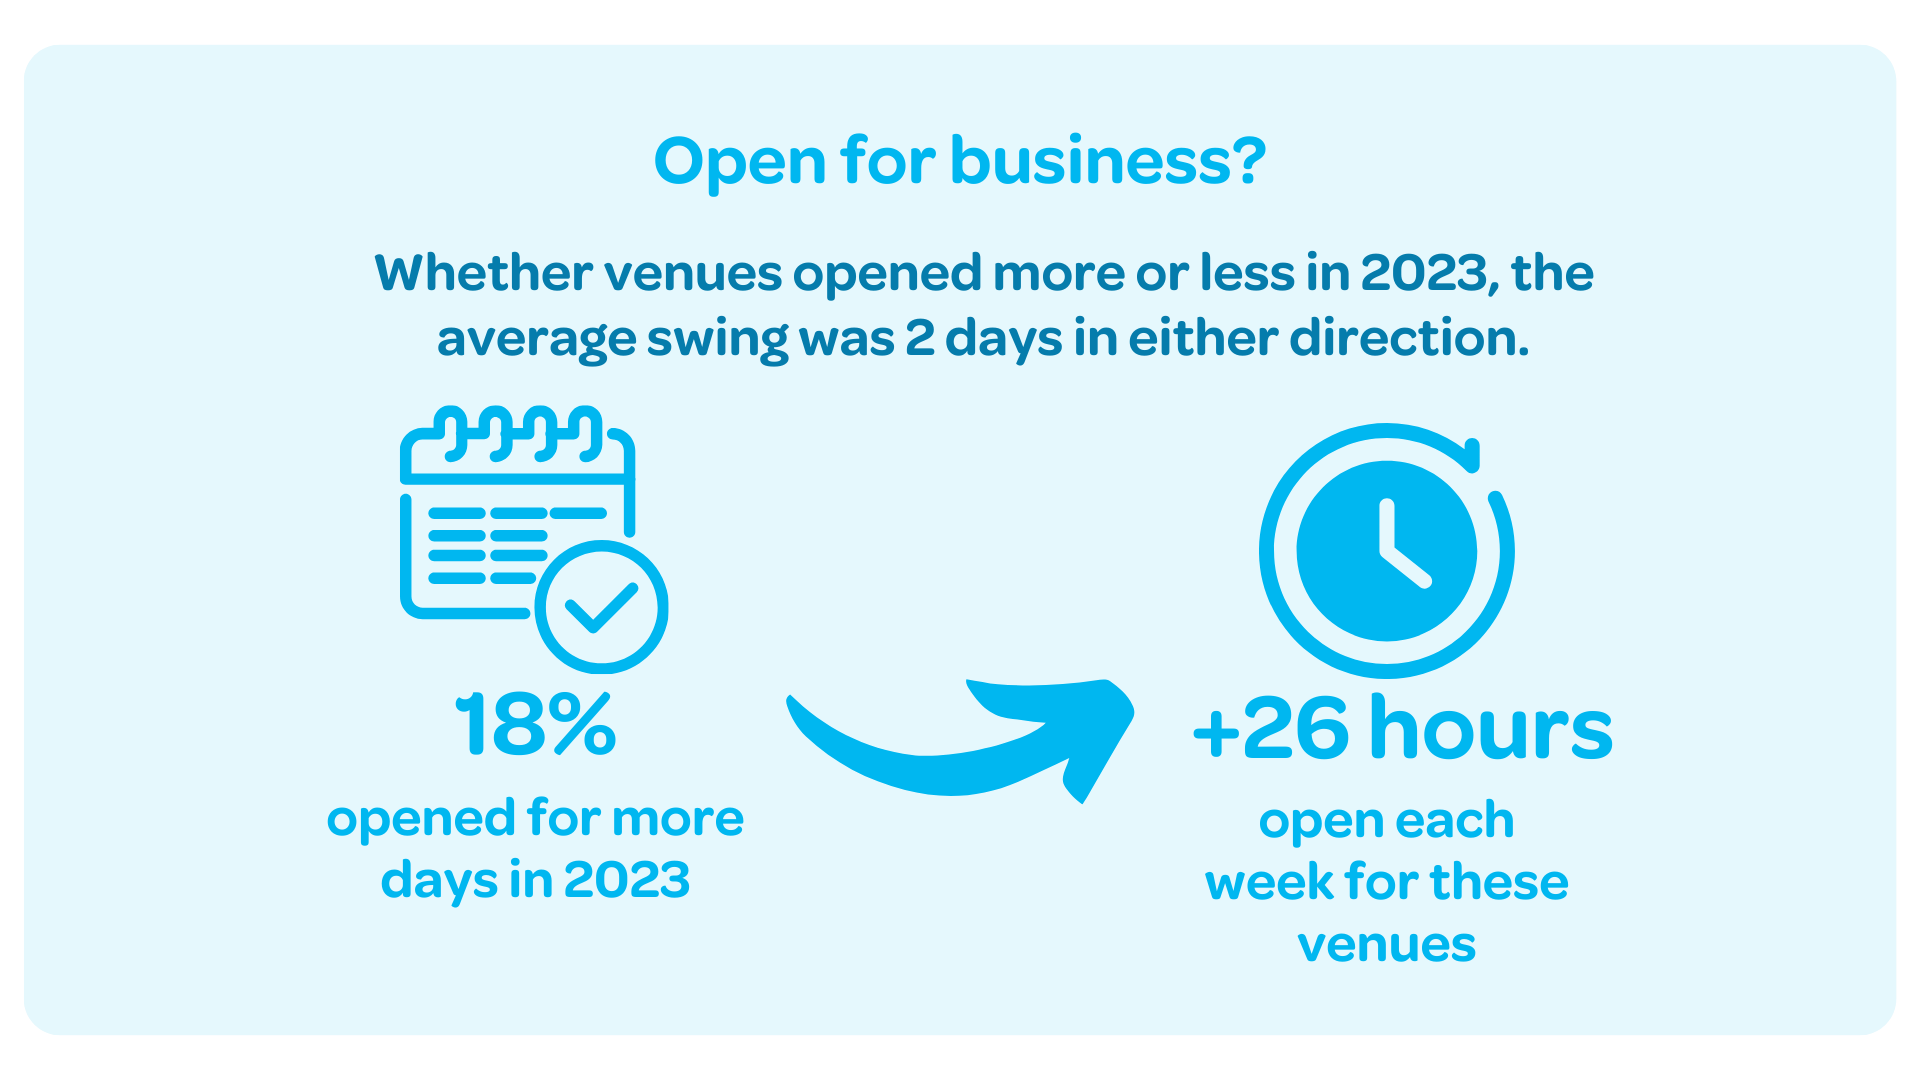 18% of hospitality venues opened for more days in 2023